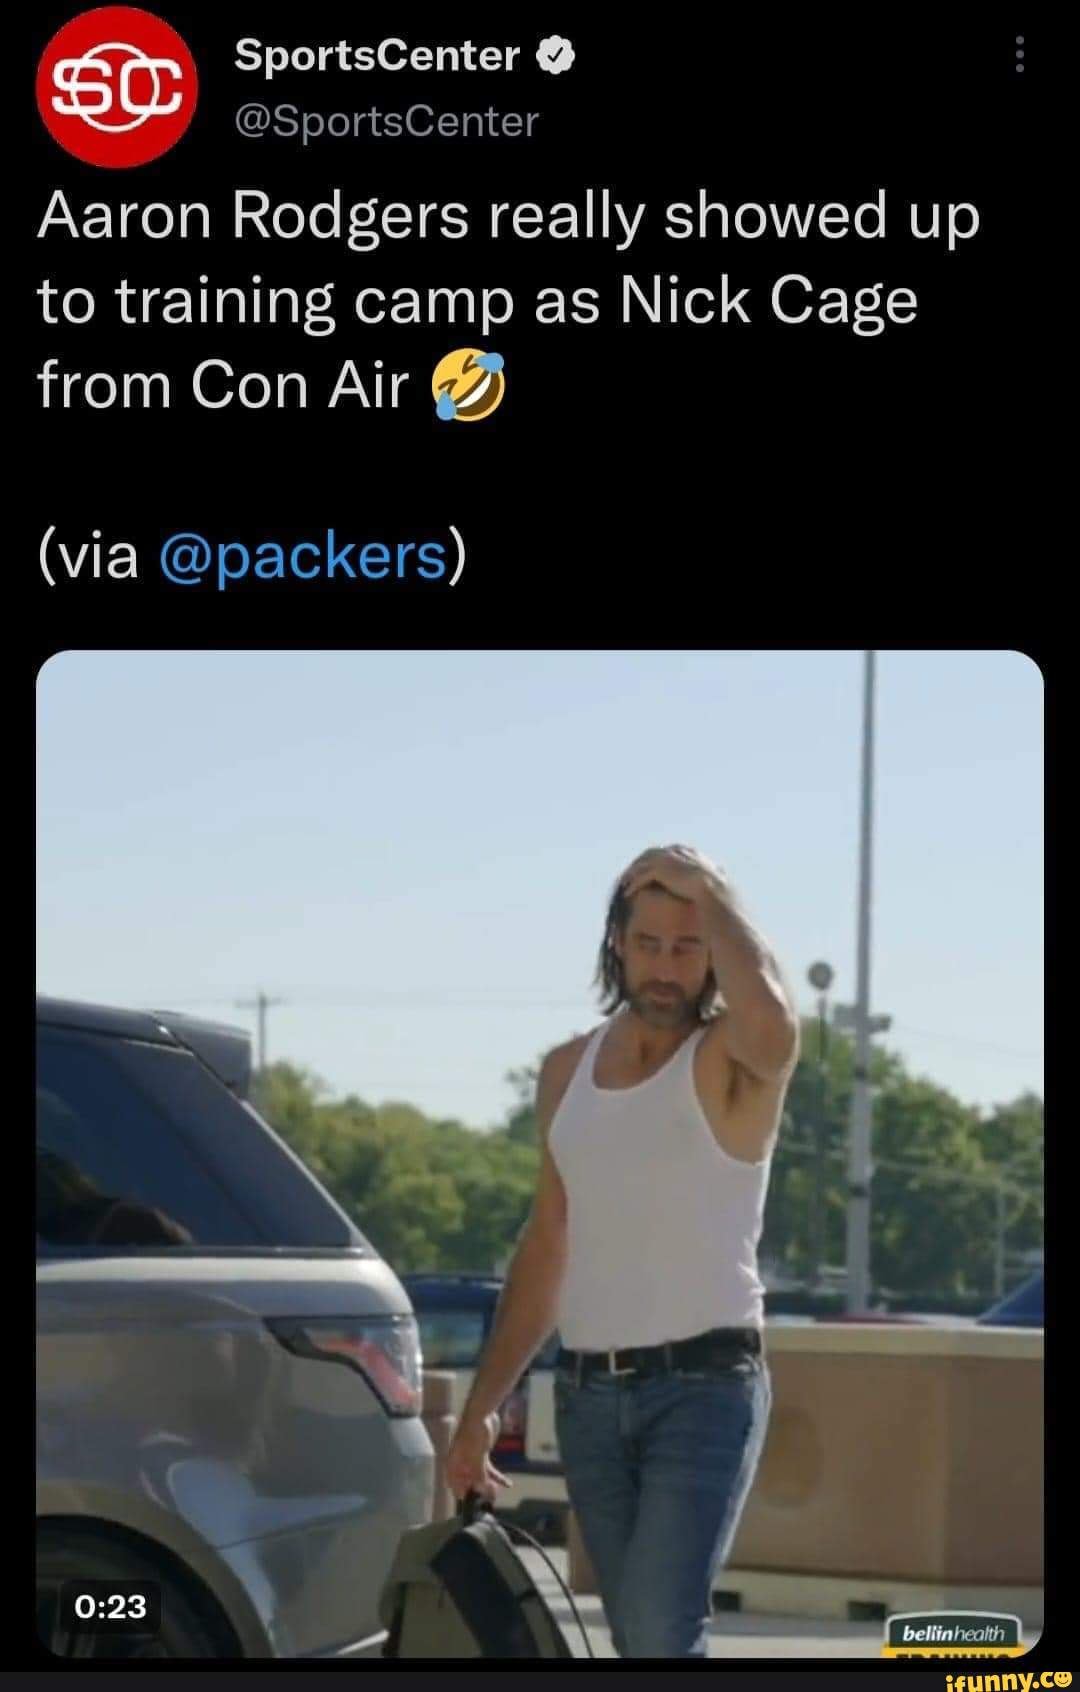 Aaron Rodgers Dressed Like Nic Cage In 'Con Air' For Camp